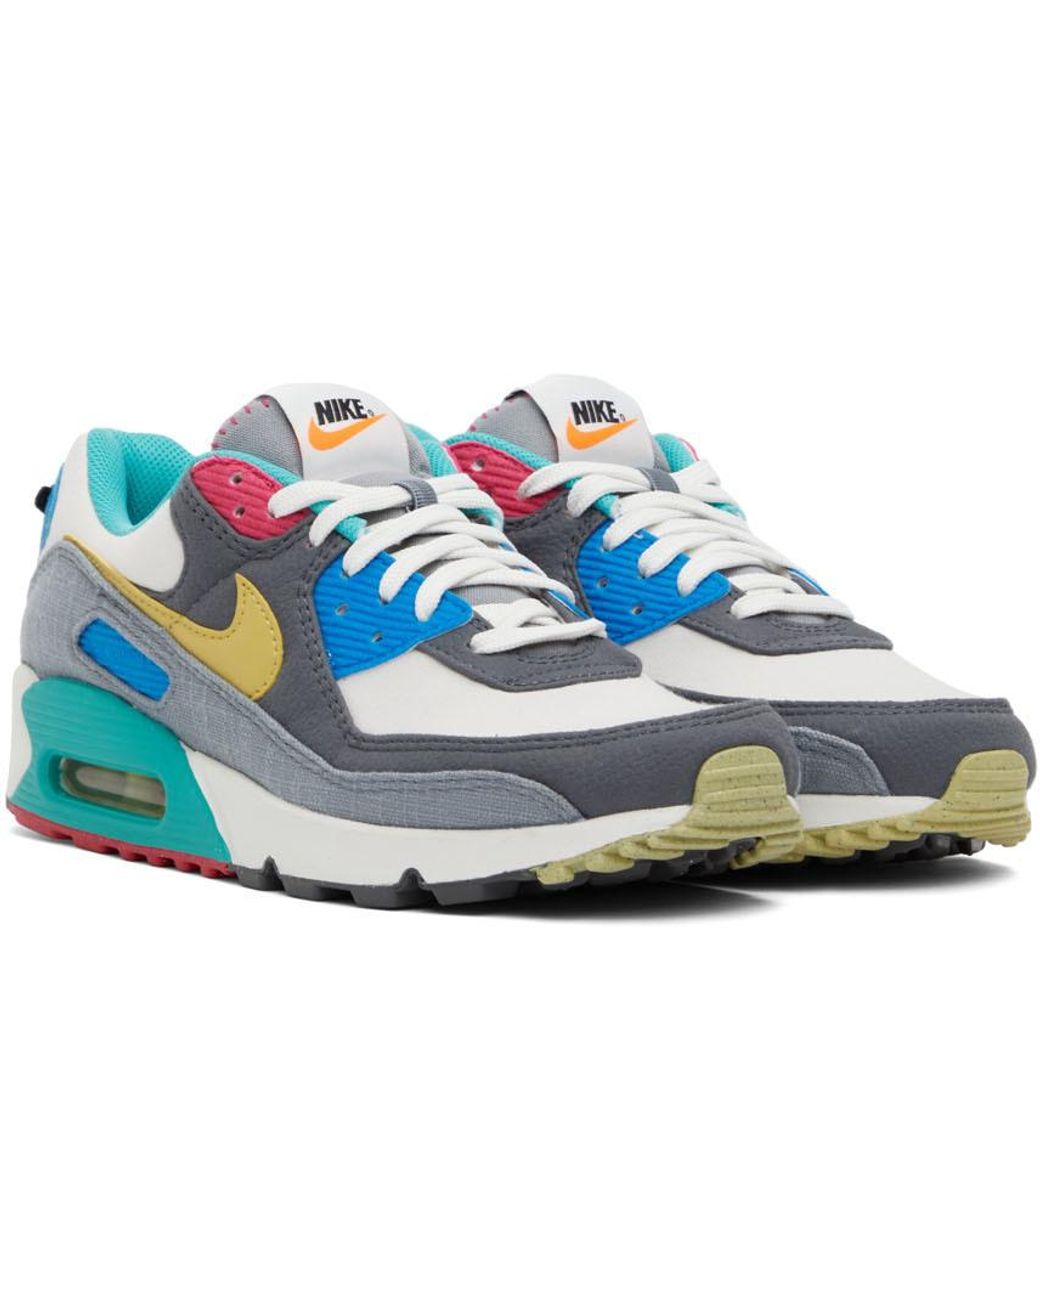 Nike Multicolor Max 90 Sneakers | Lyst